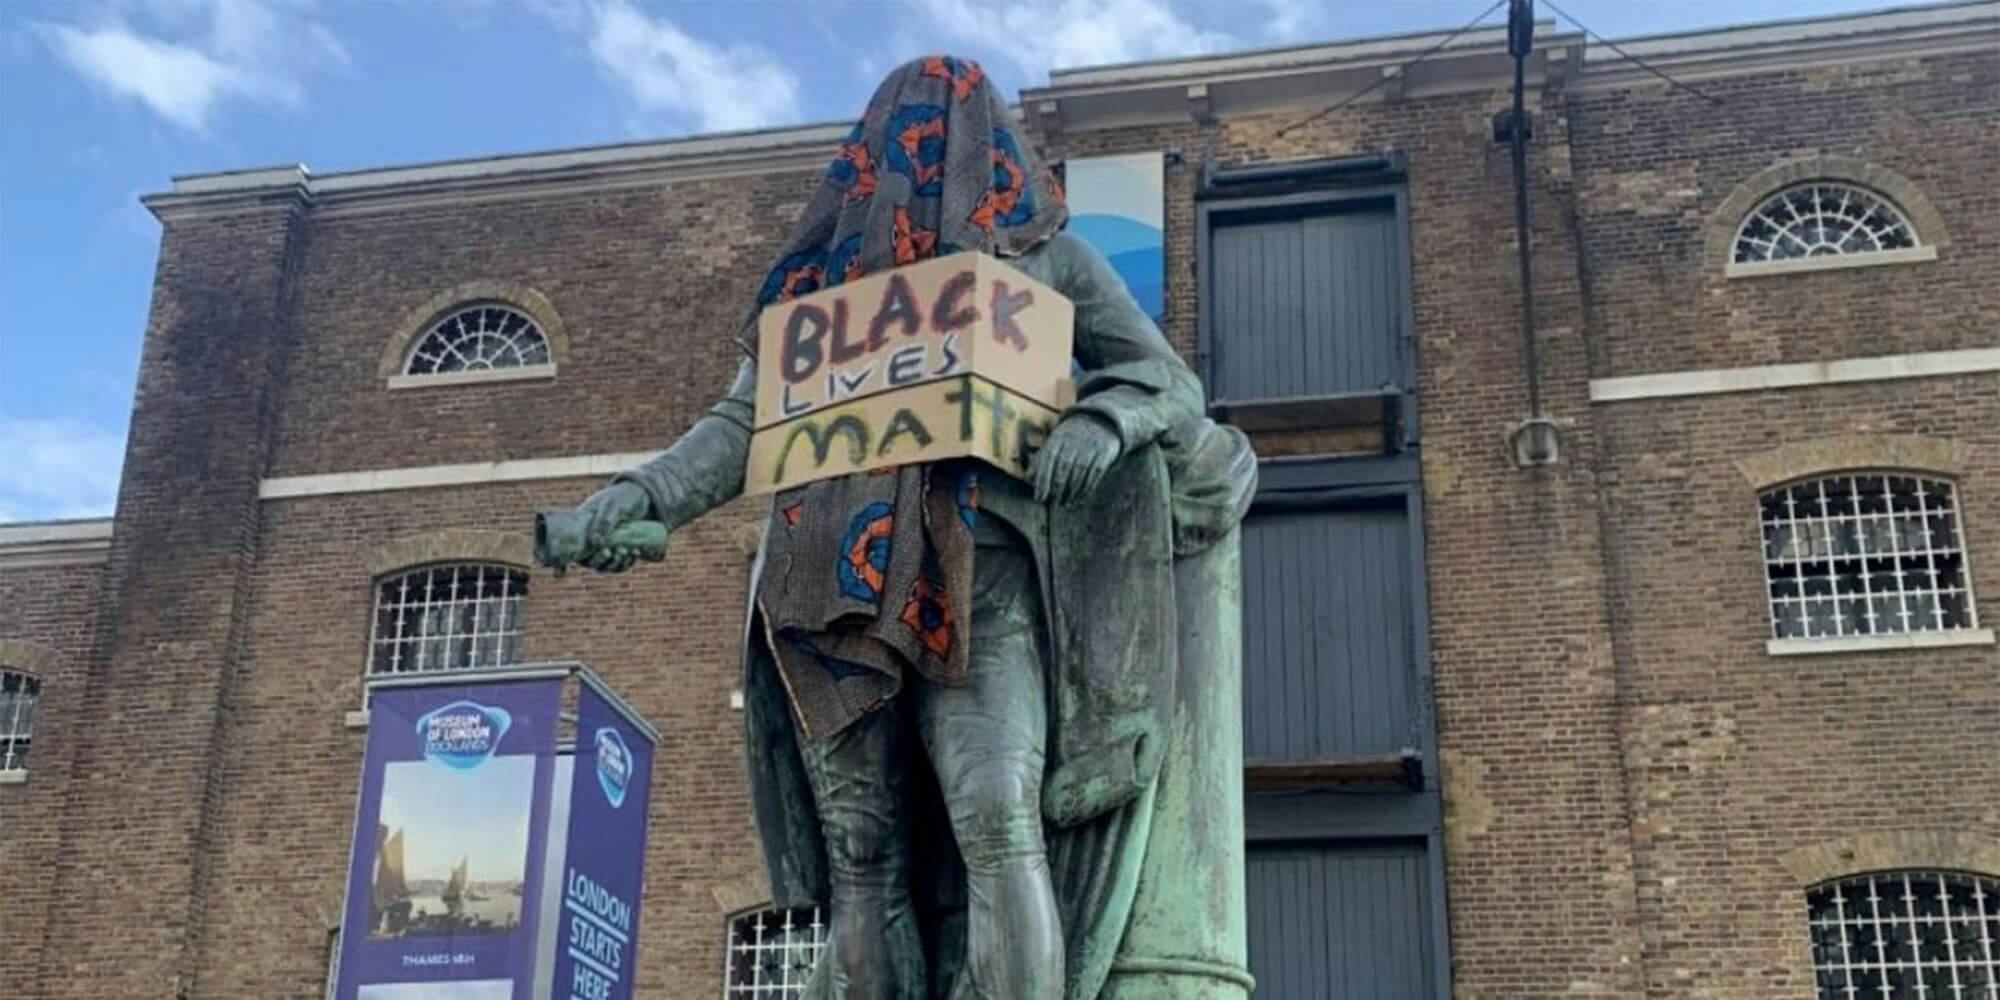 robert milligan statue covered with blanket and "Black Lives Matter" sign